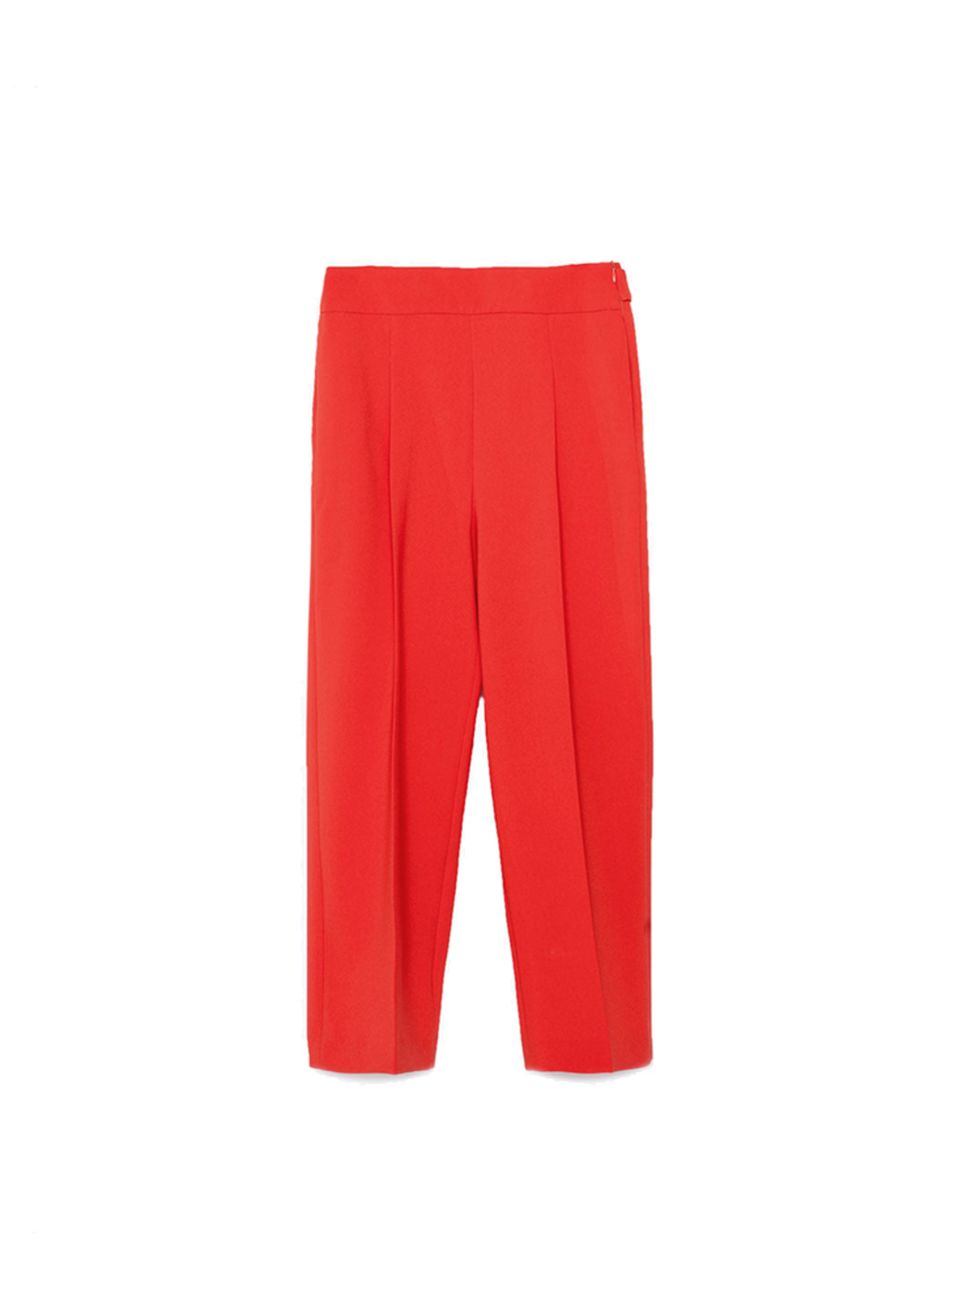 <p>Bold-colour trousers are made for our Sub-Editor Claire Sibbick.</p>

<p><a href="http://www.zara.com/uk/en/woman/trousers/view-all/loose-fit-trousers-c719022p2672543.html" target="_blank">Zara </a>trousers, £29.99</p>